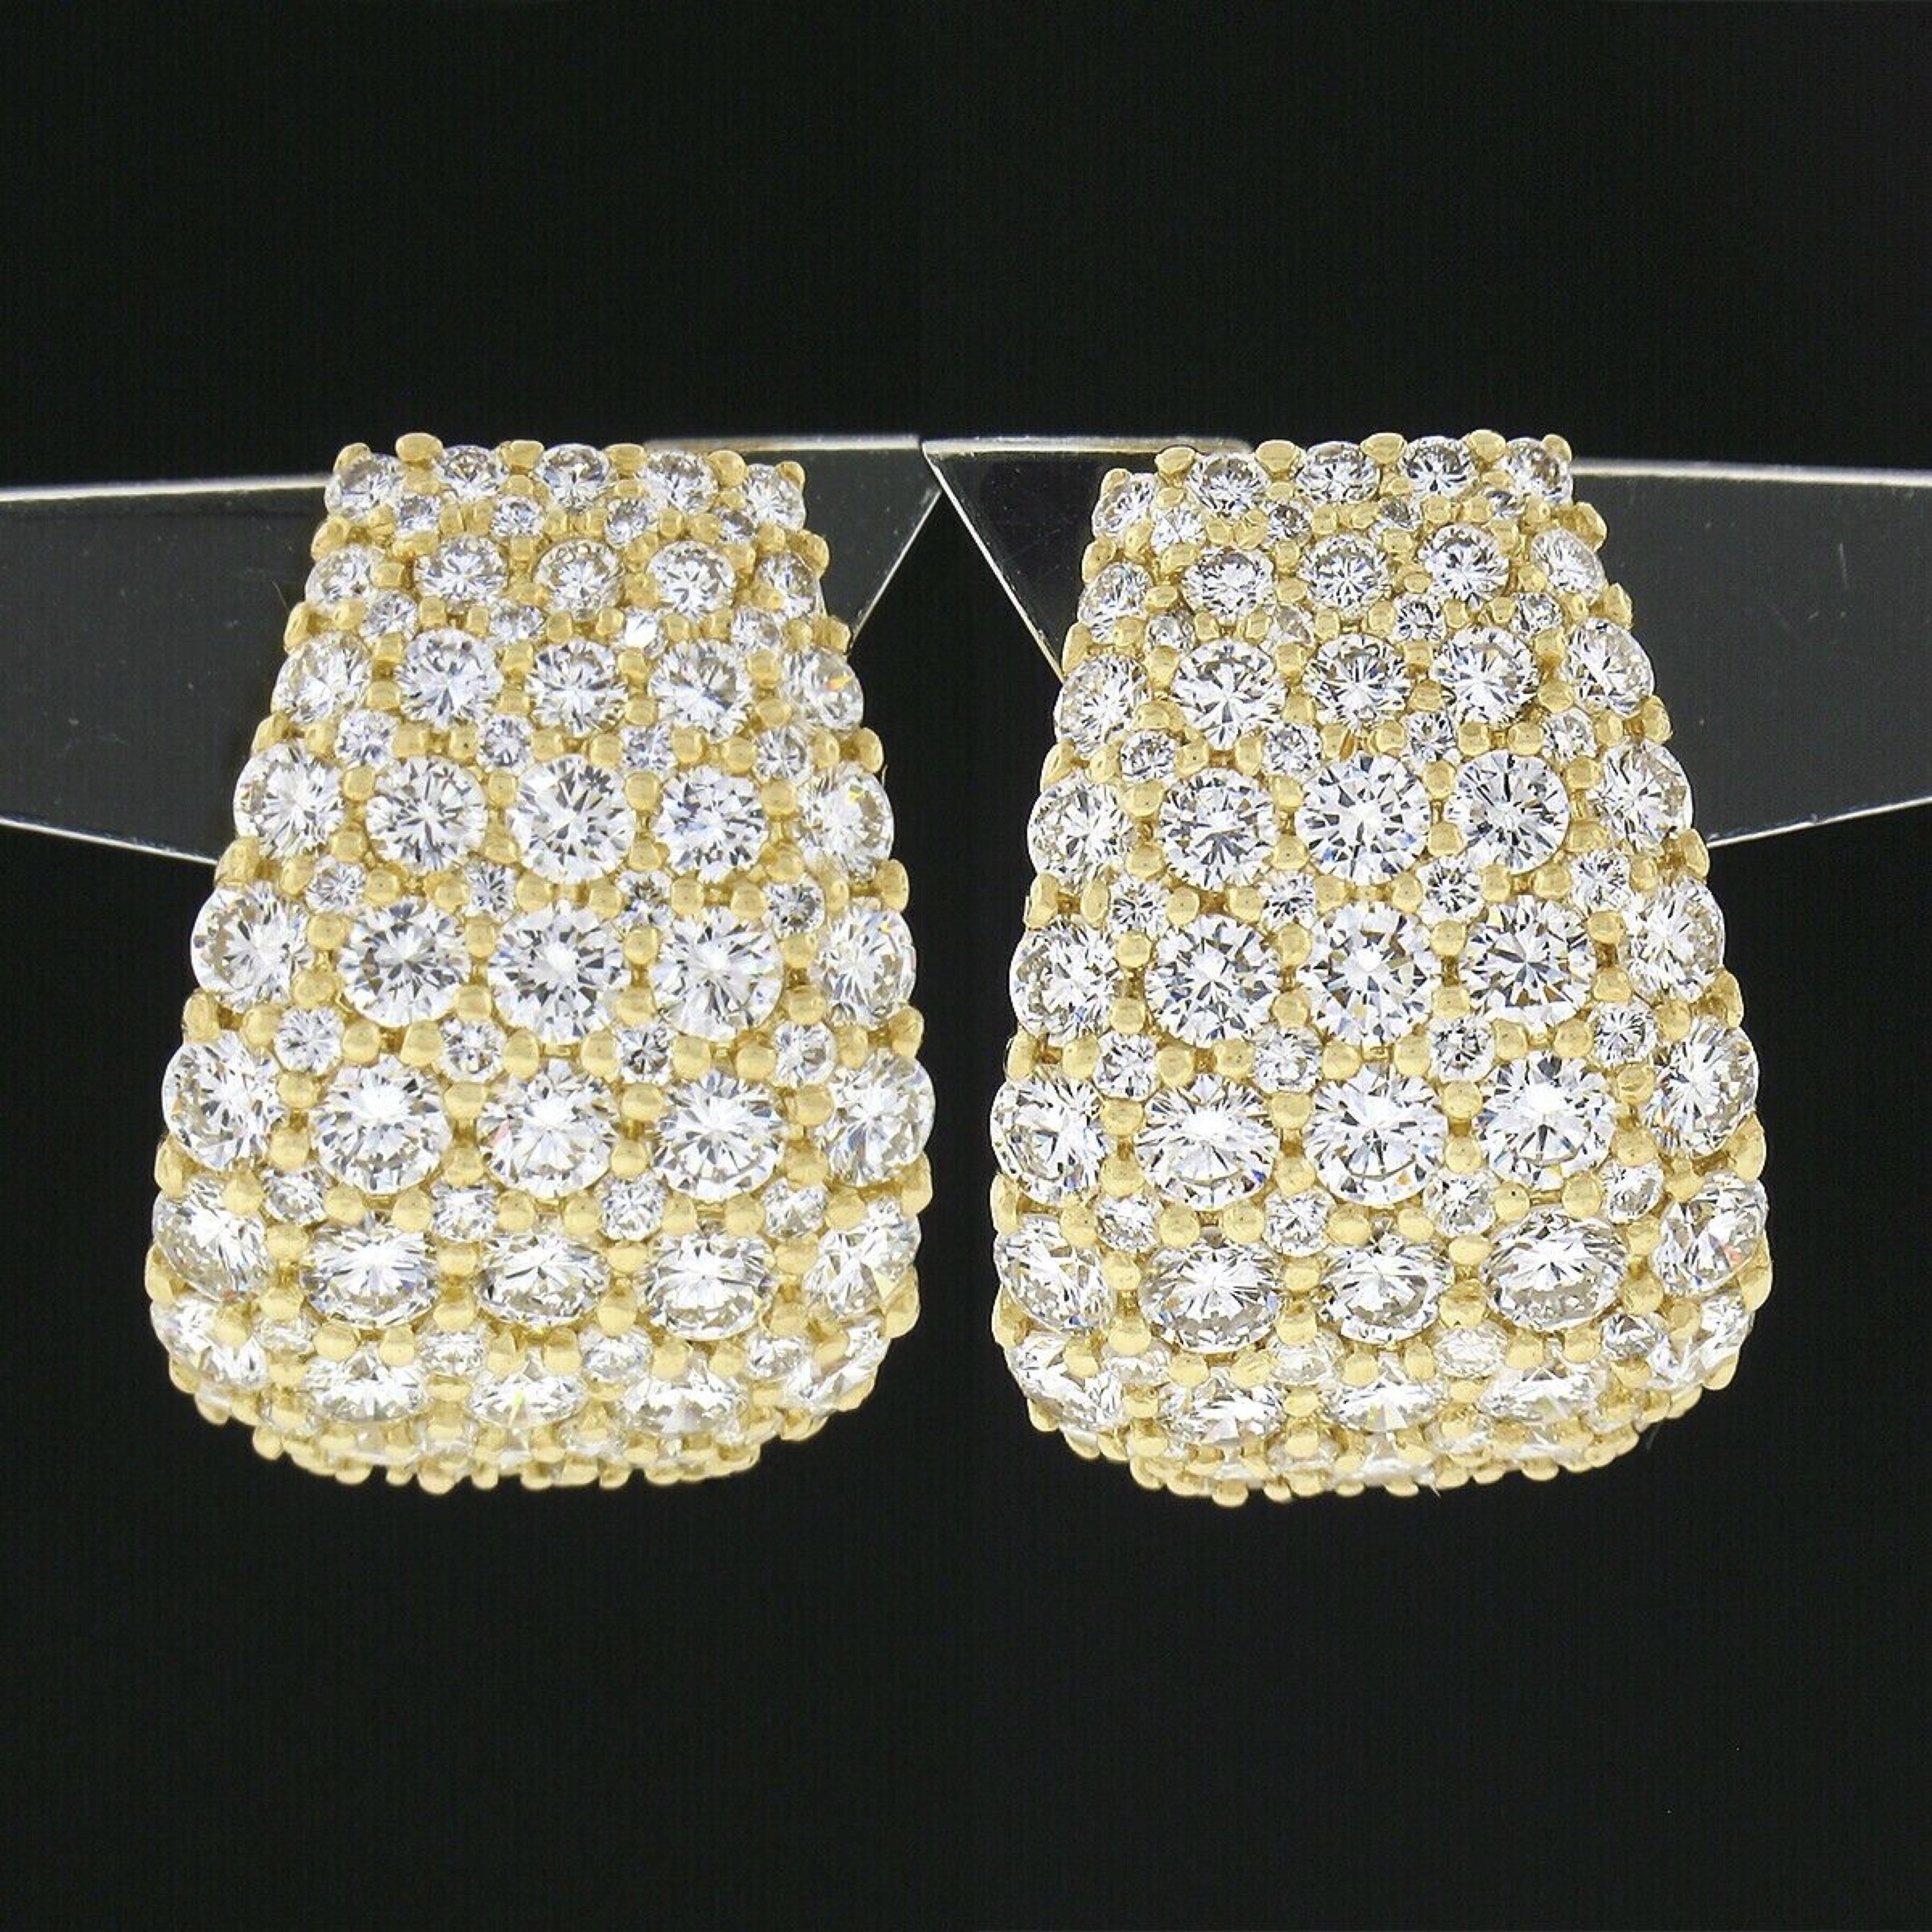 Here we have an exceptional pair of cuff earrings by NOVA which are crafted in solid 18k yellow gold and feature a wide design completely drenched in super fine quality diamonds throughout their front. These stunning round brilliant cut stones total